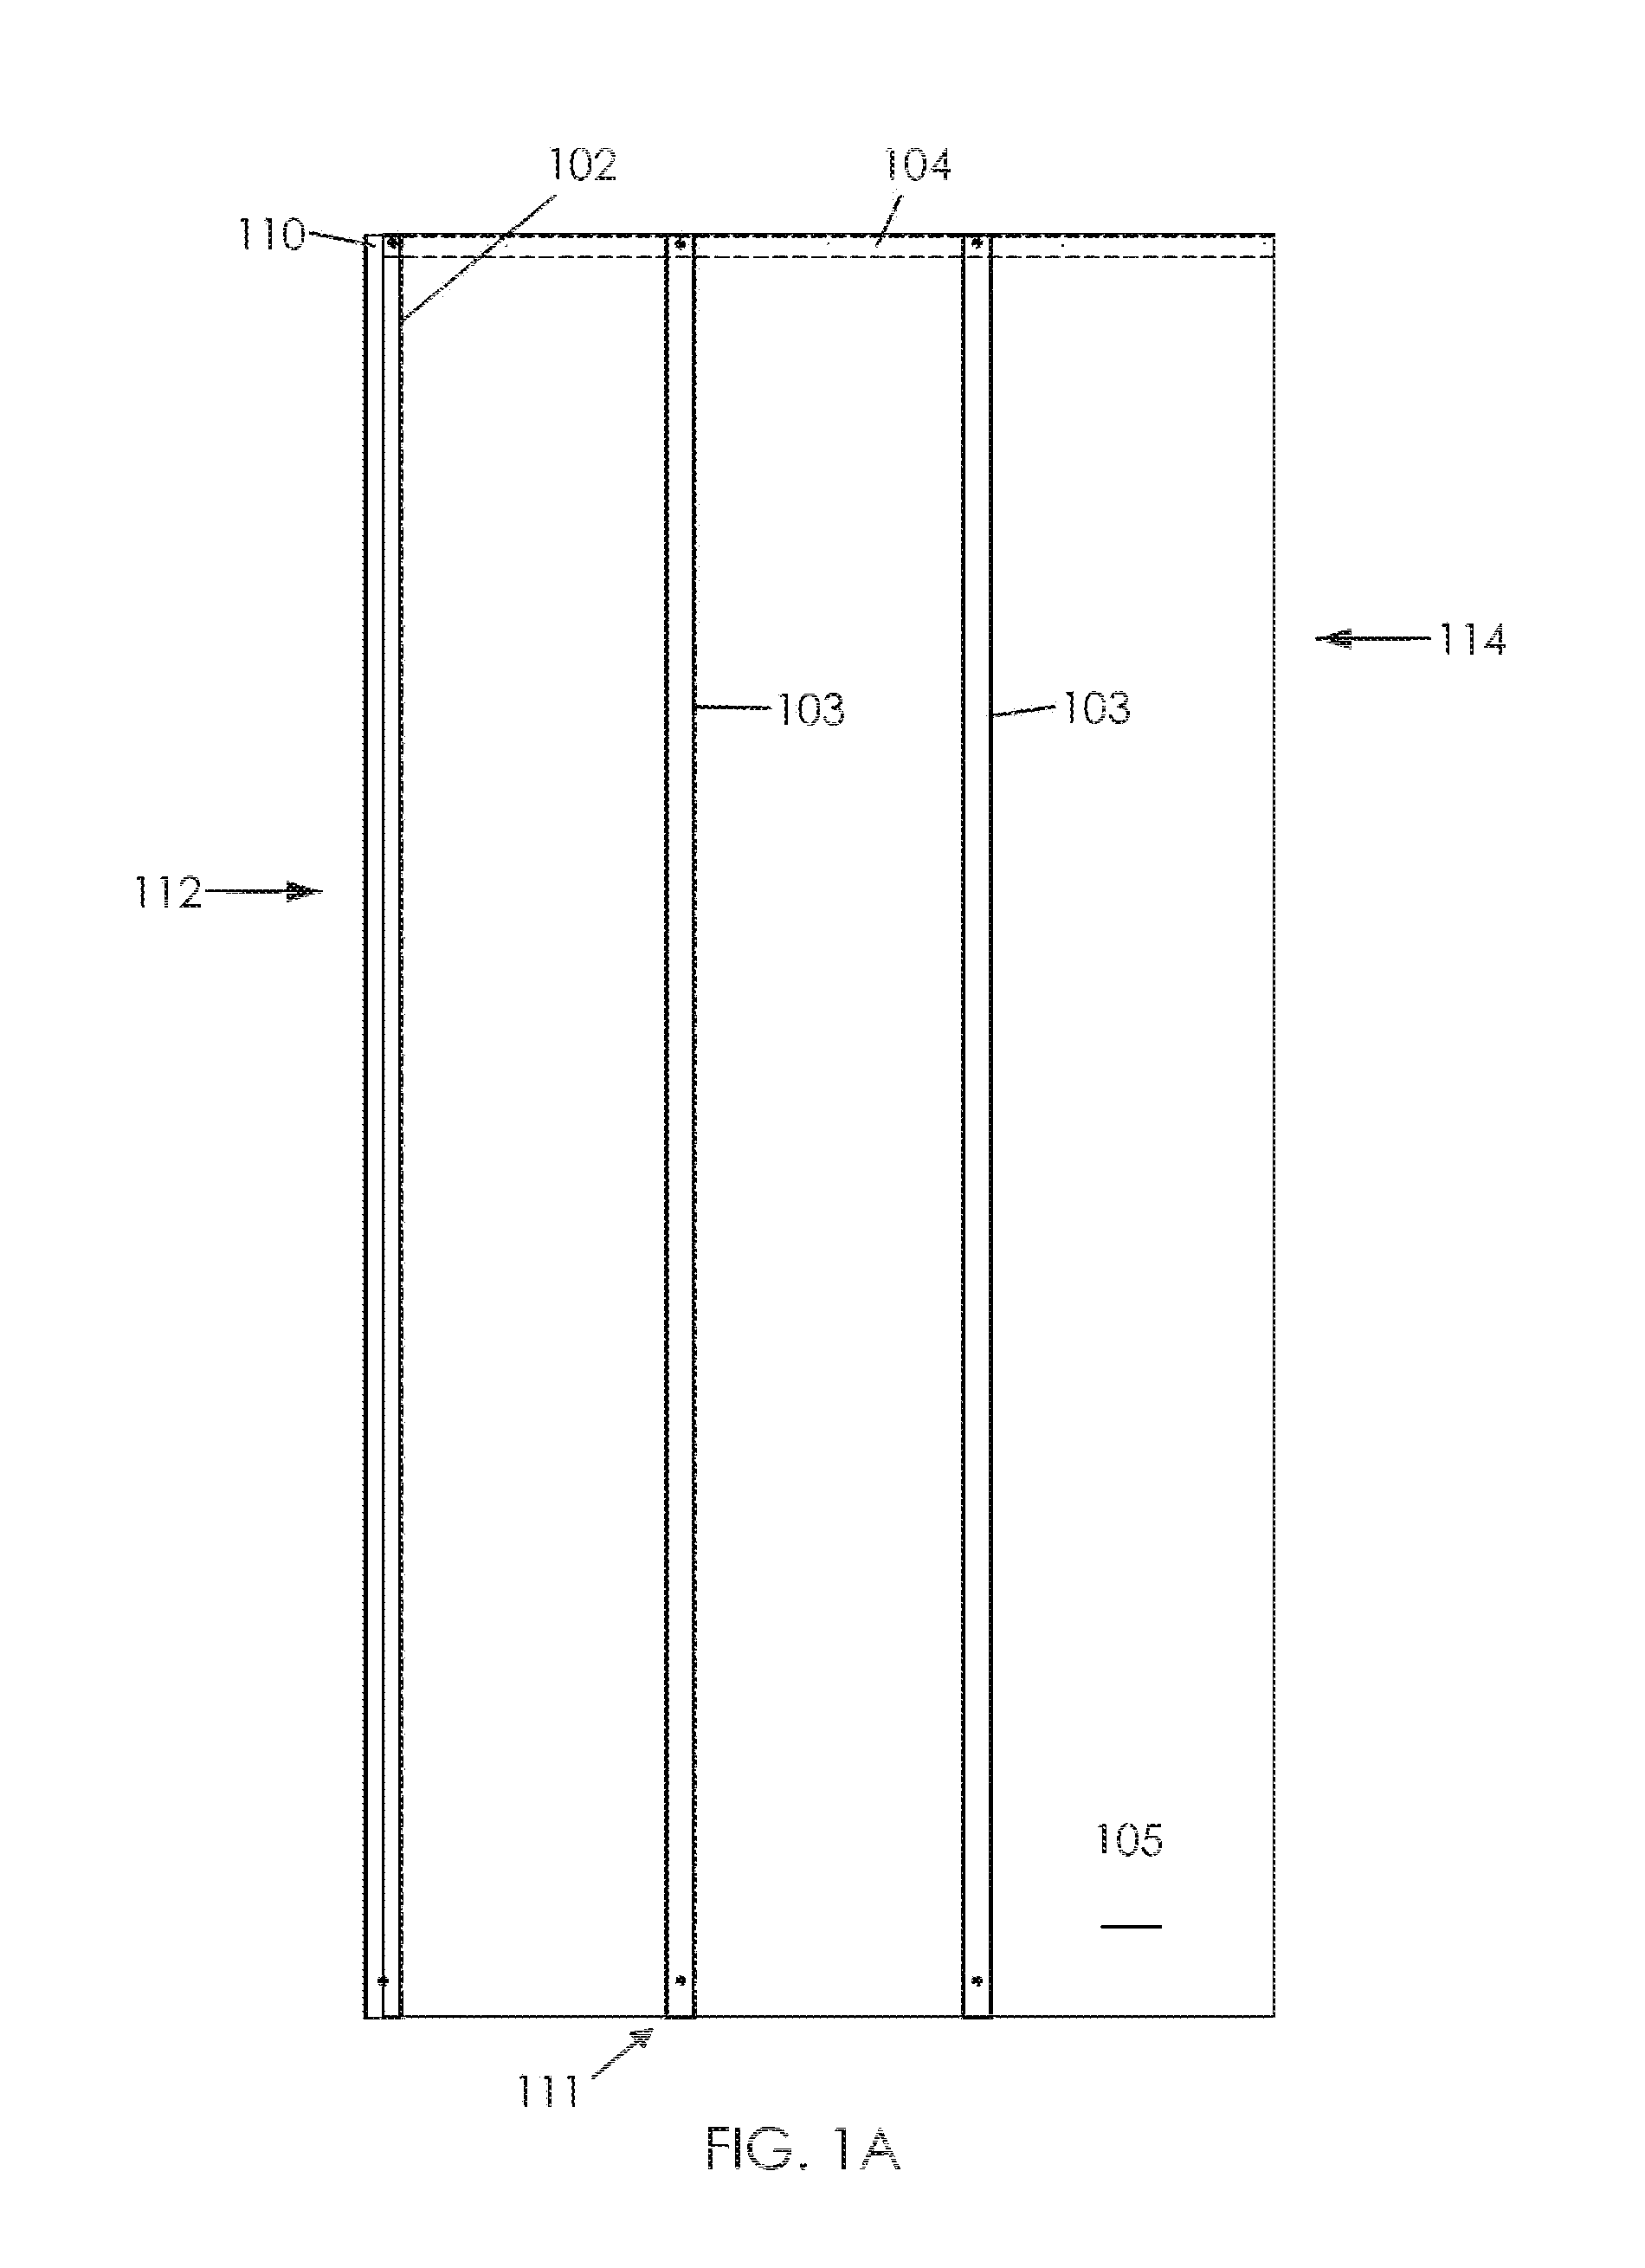 Structural Wall Panels for Use in Light-Frame Construction and Methods of Construction Employing Structural Wall Panels